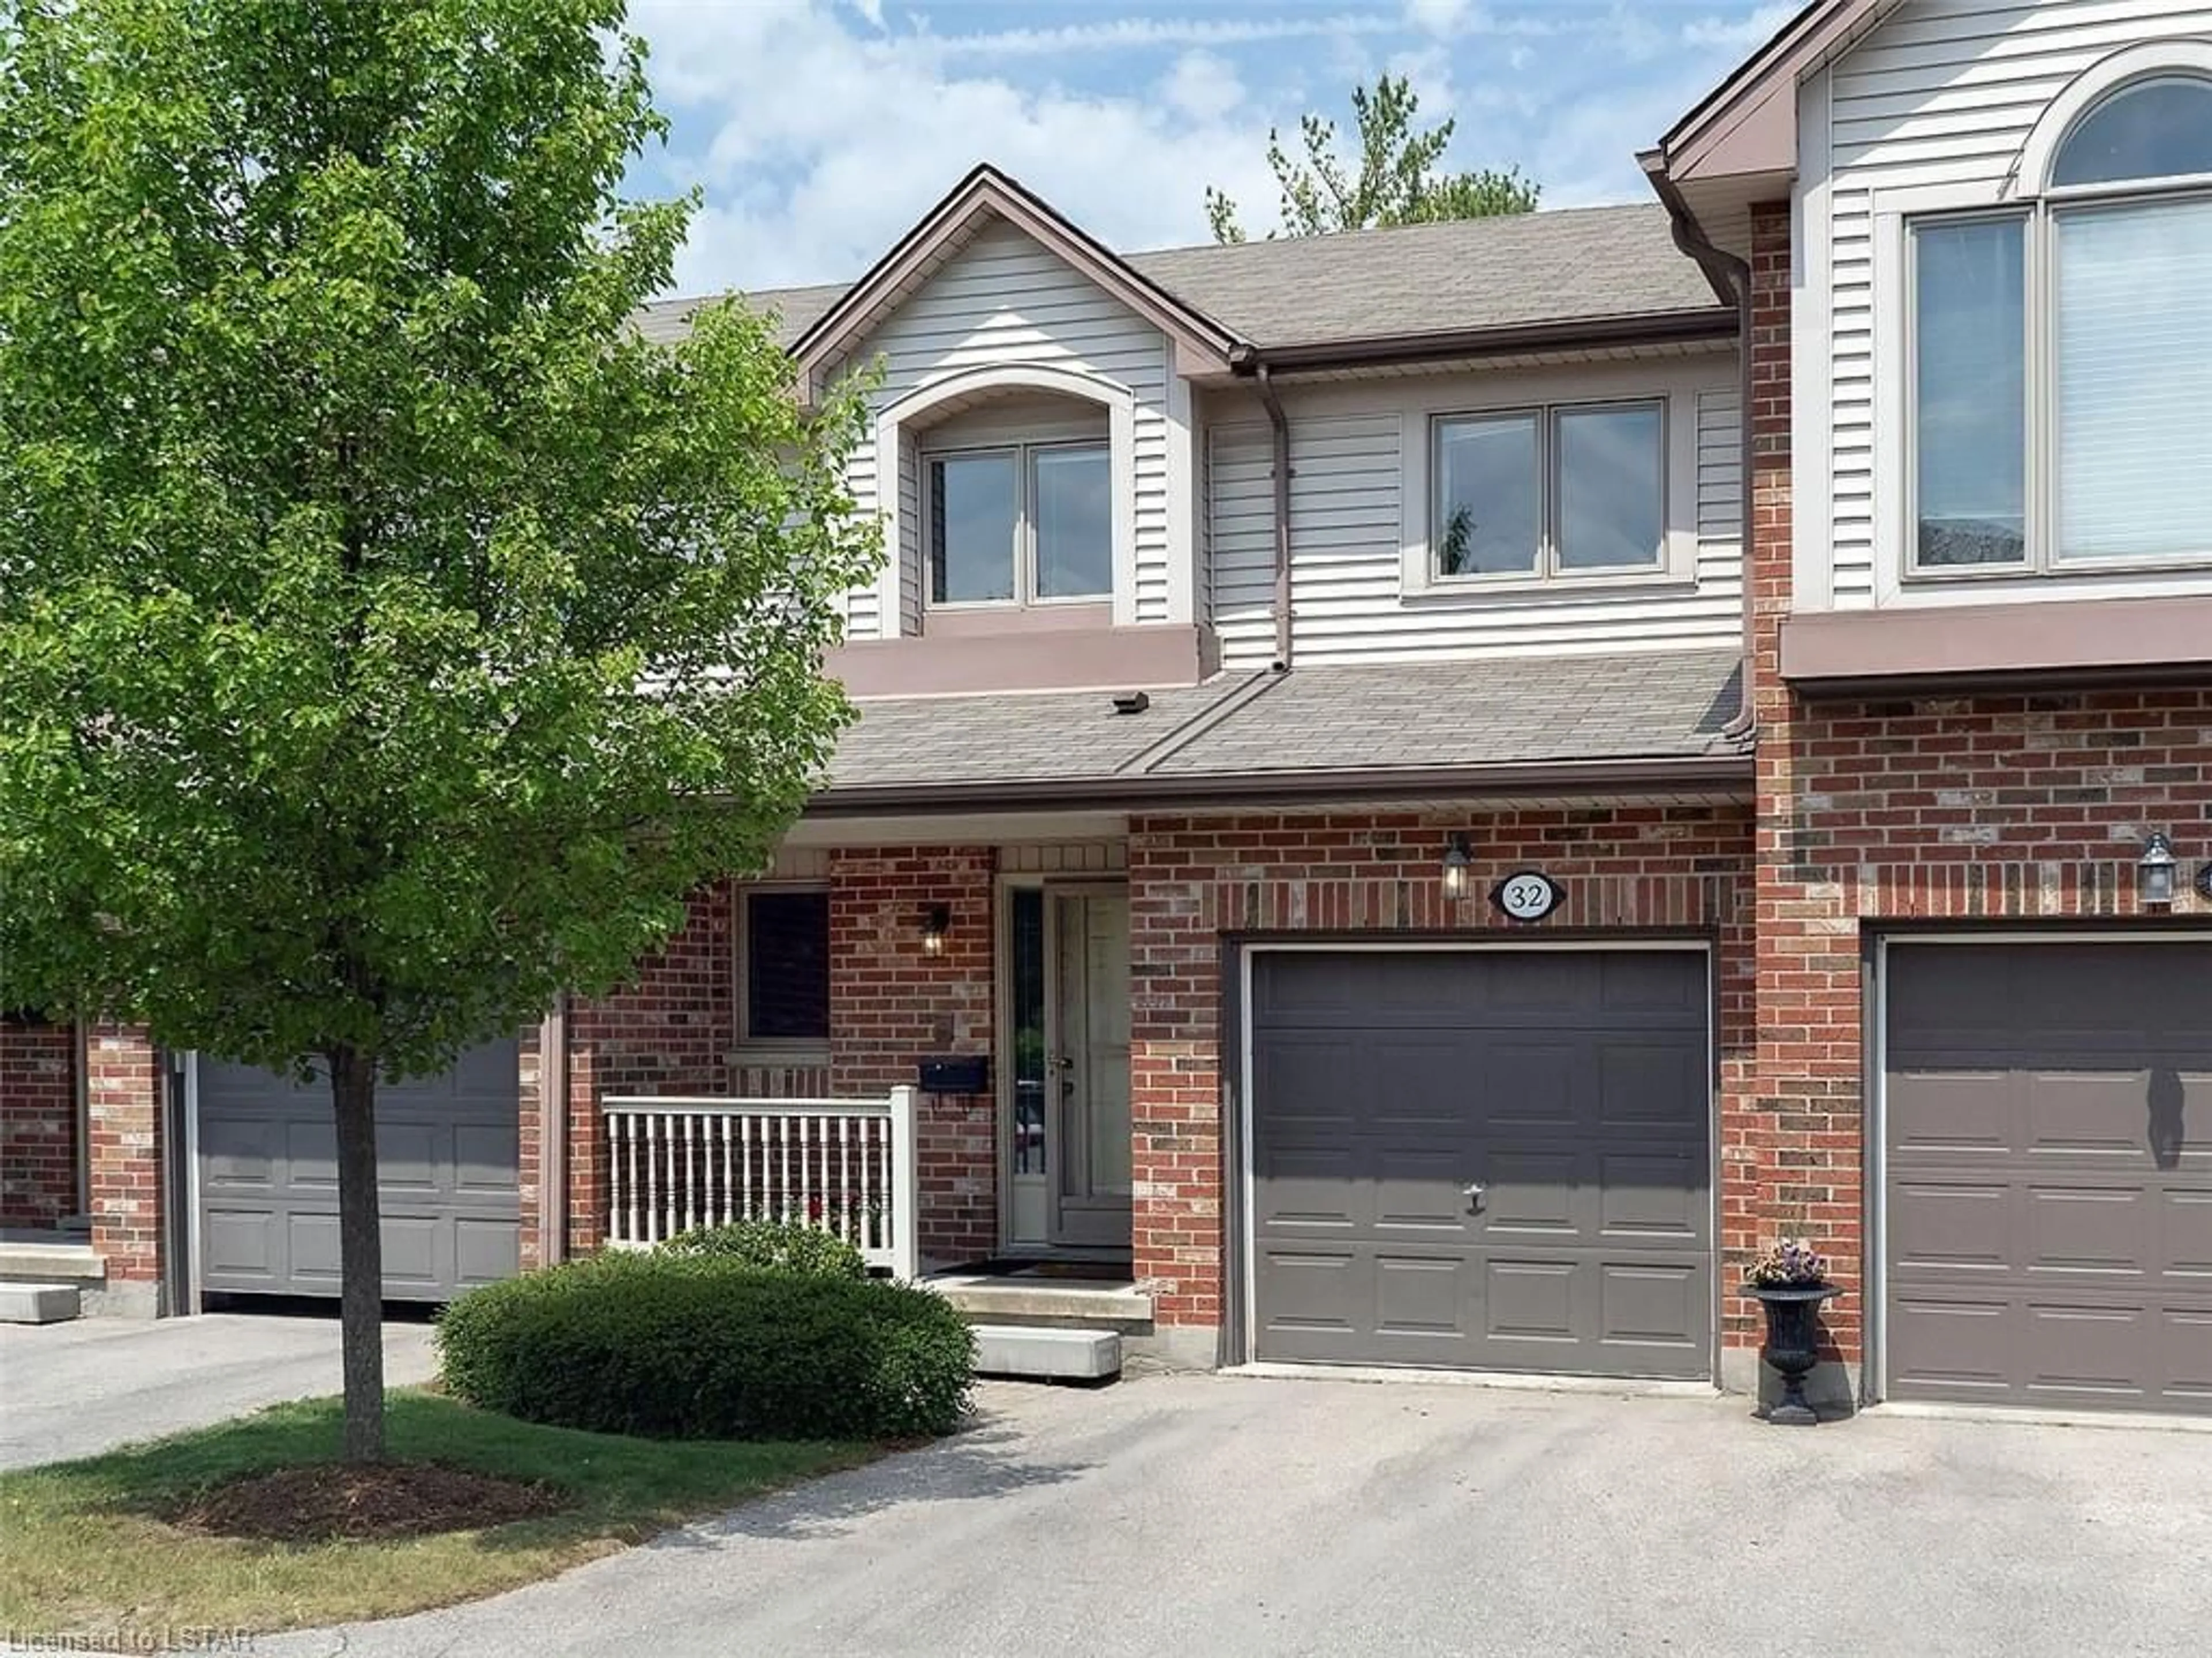 Home with brick exterior material for 1478 Adelaide St #32, London Ontario N5X 3Y1